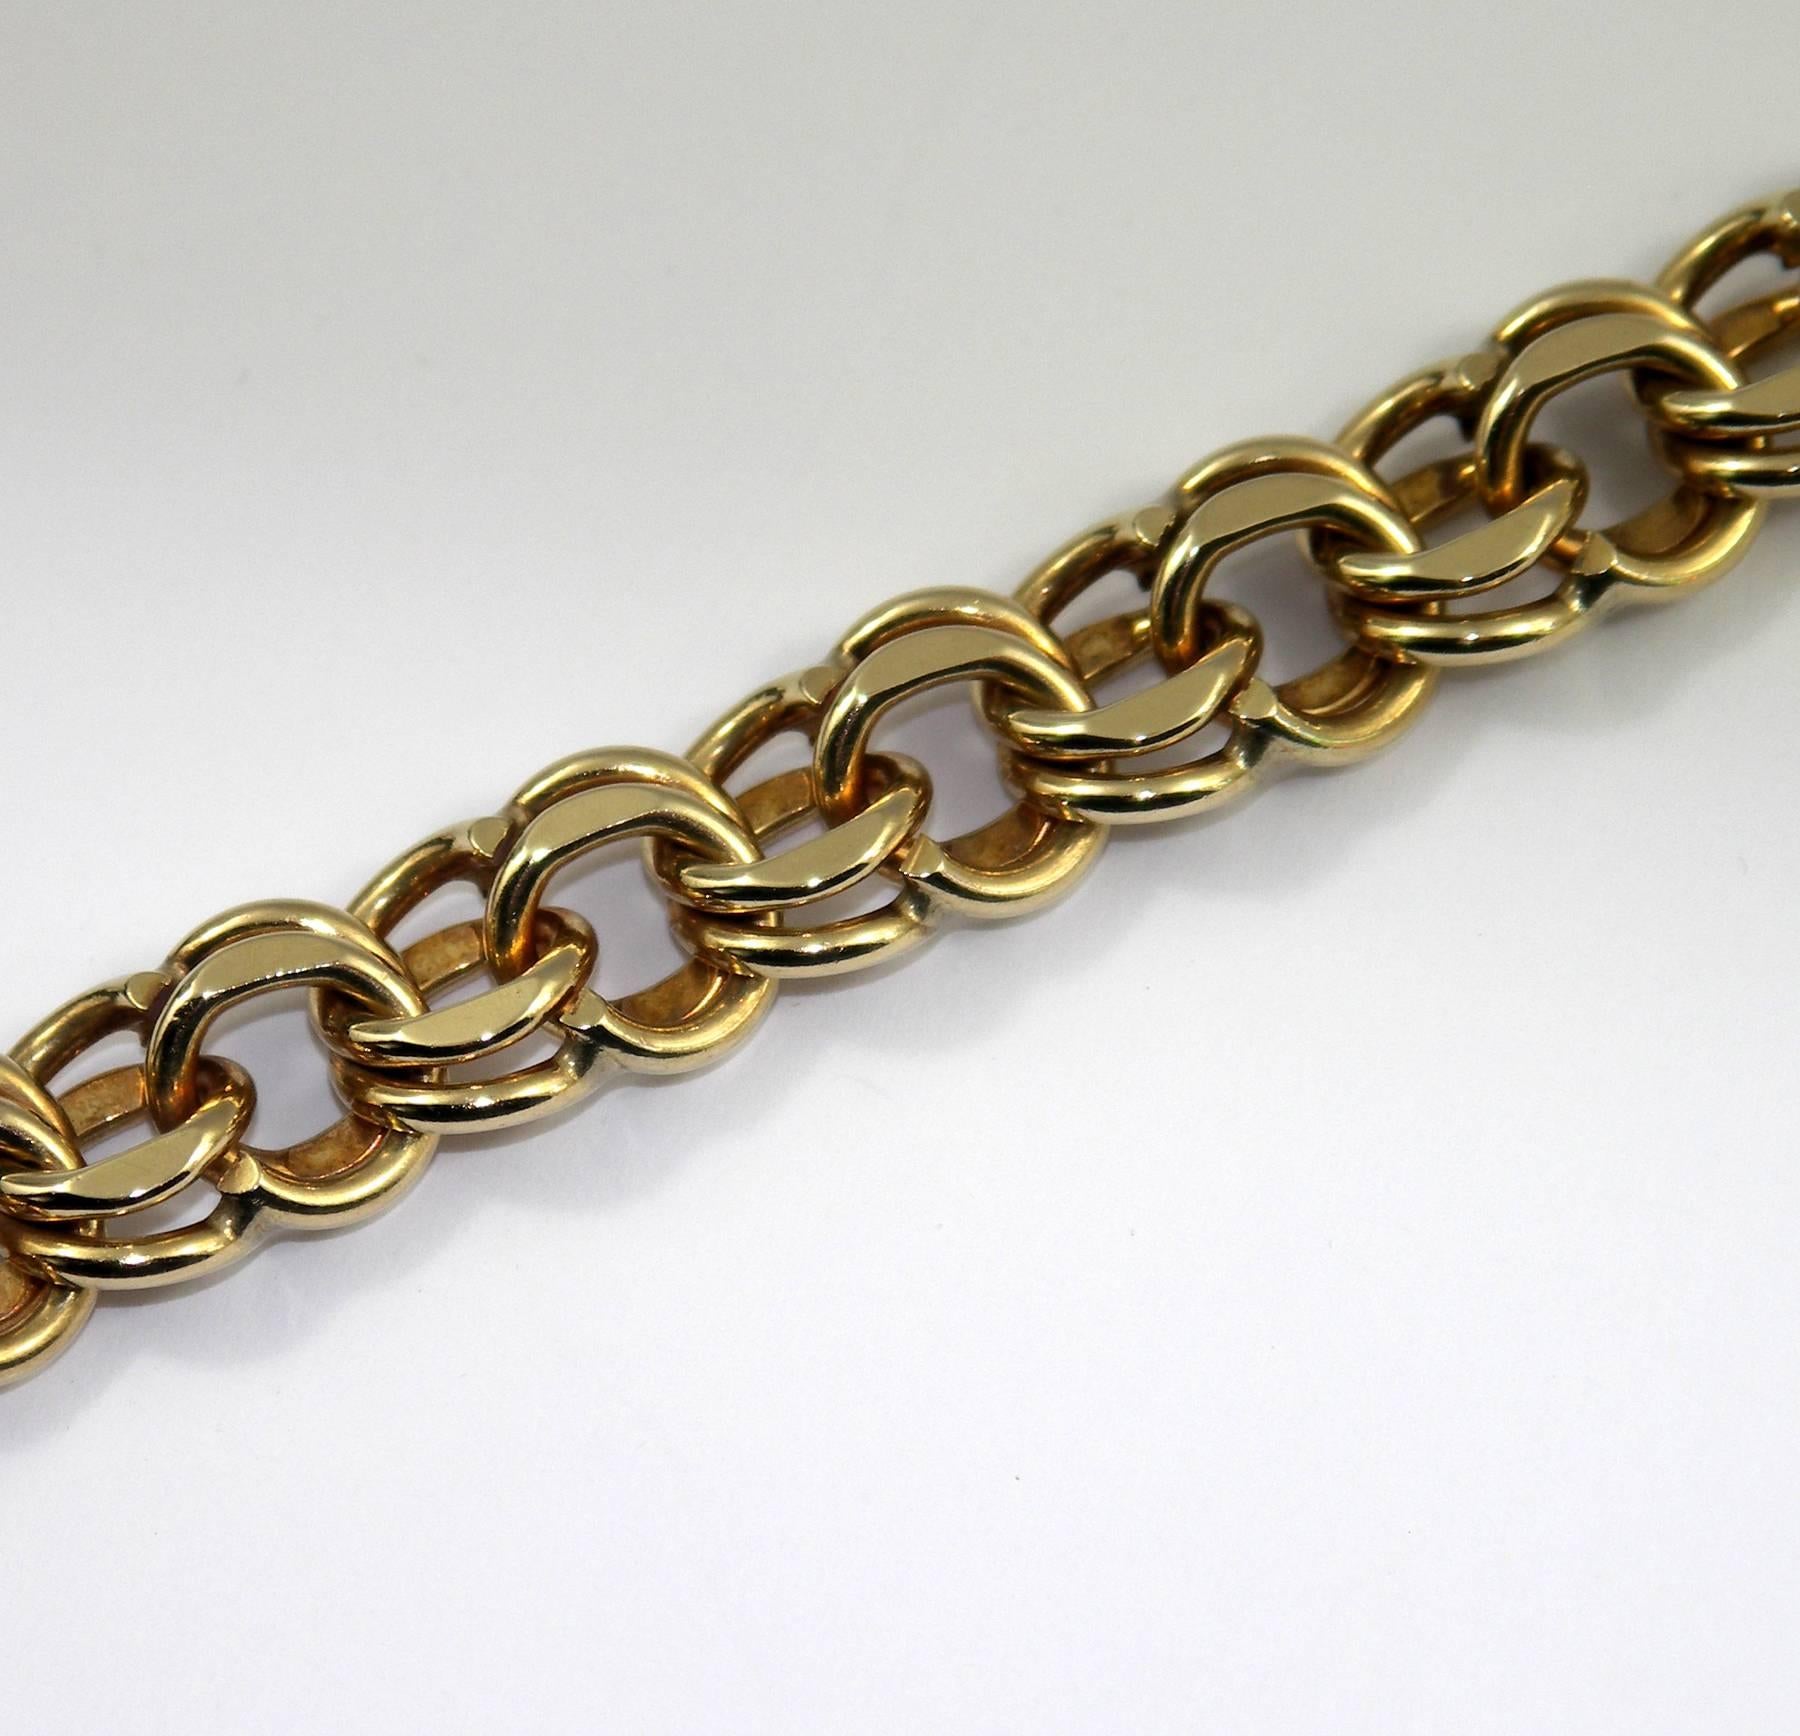 A 14K yellow gold double spiral link bracelet measuring 1/2 inch wide, and 7 1/4 inches long. This bracelet offers a terrific platform to create a charm bracelet. 
Weight 56 grams.